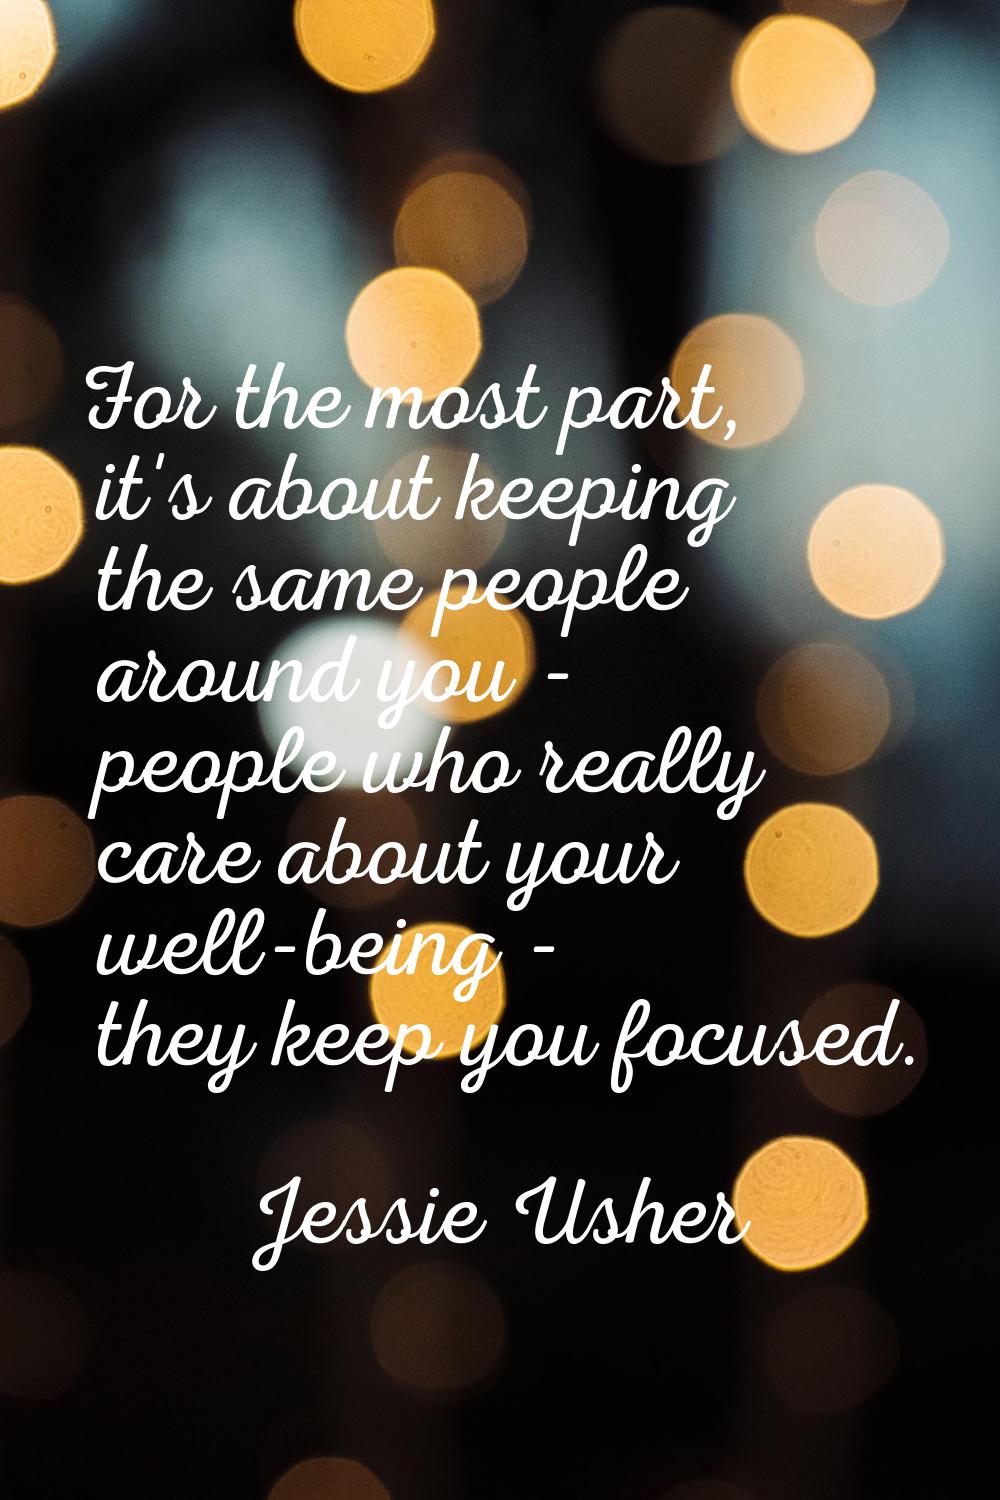 For the most part, it's about keeping the same people around you - people who really care about you